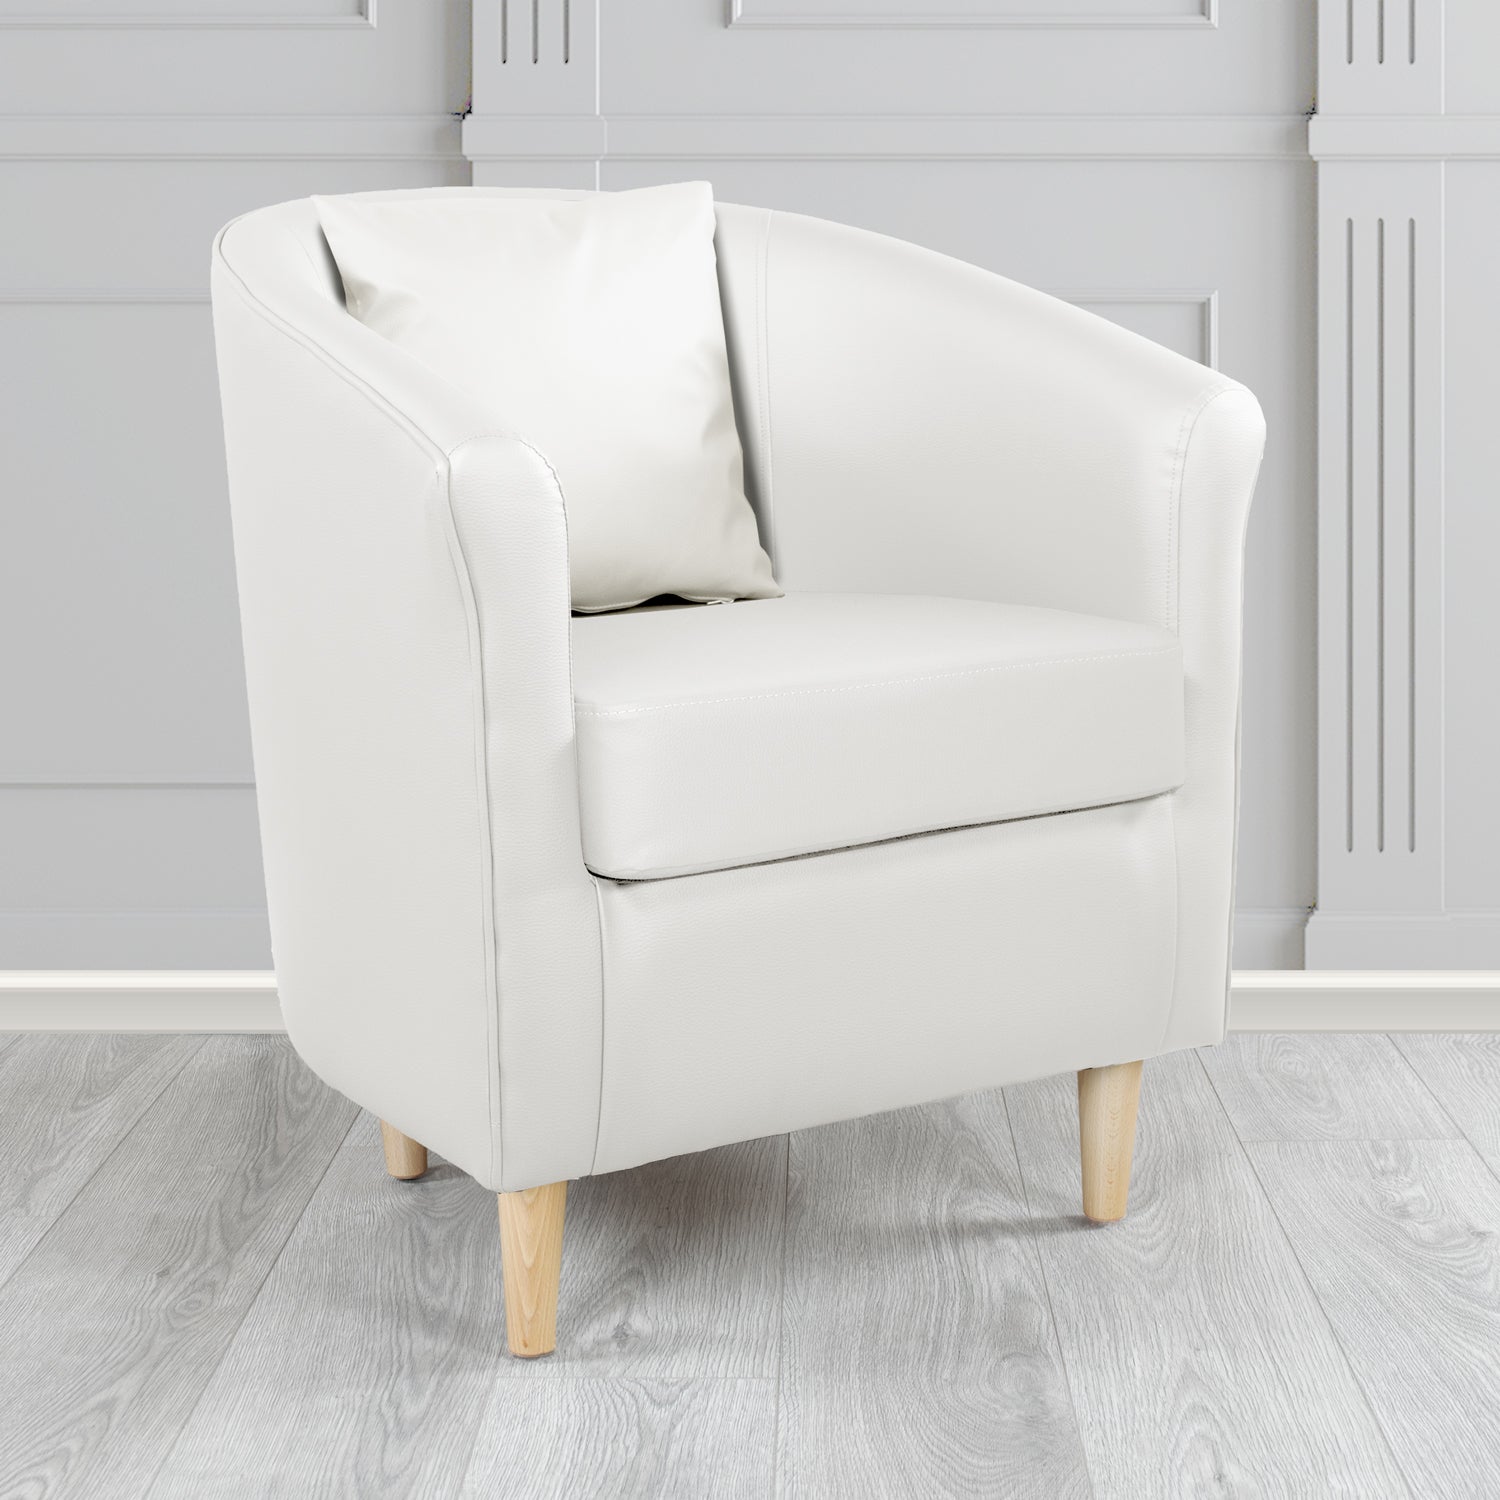 St Tropez Tub Chair with Scatter Cushion in Madrid White Faux Leather - The Tub Chair Shop